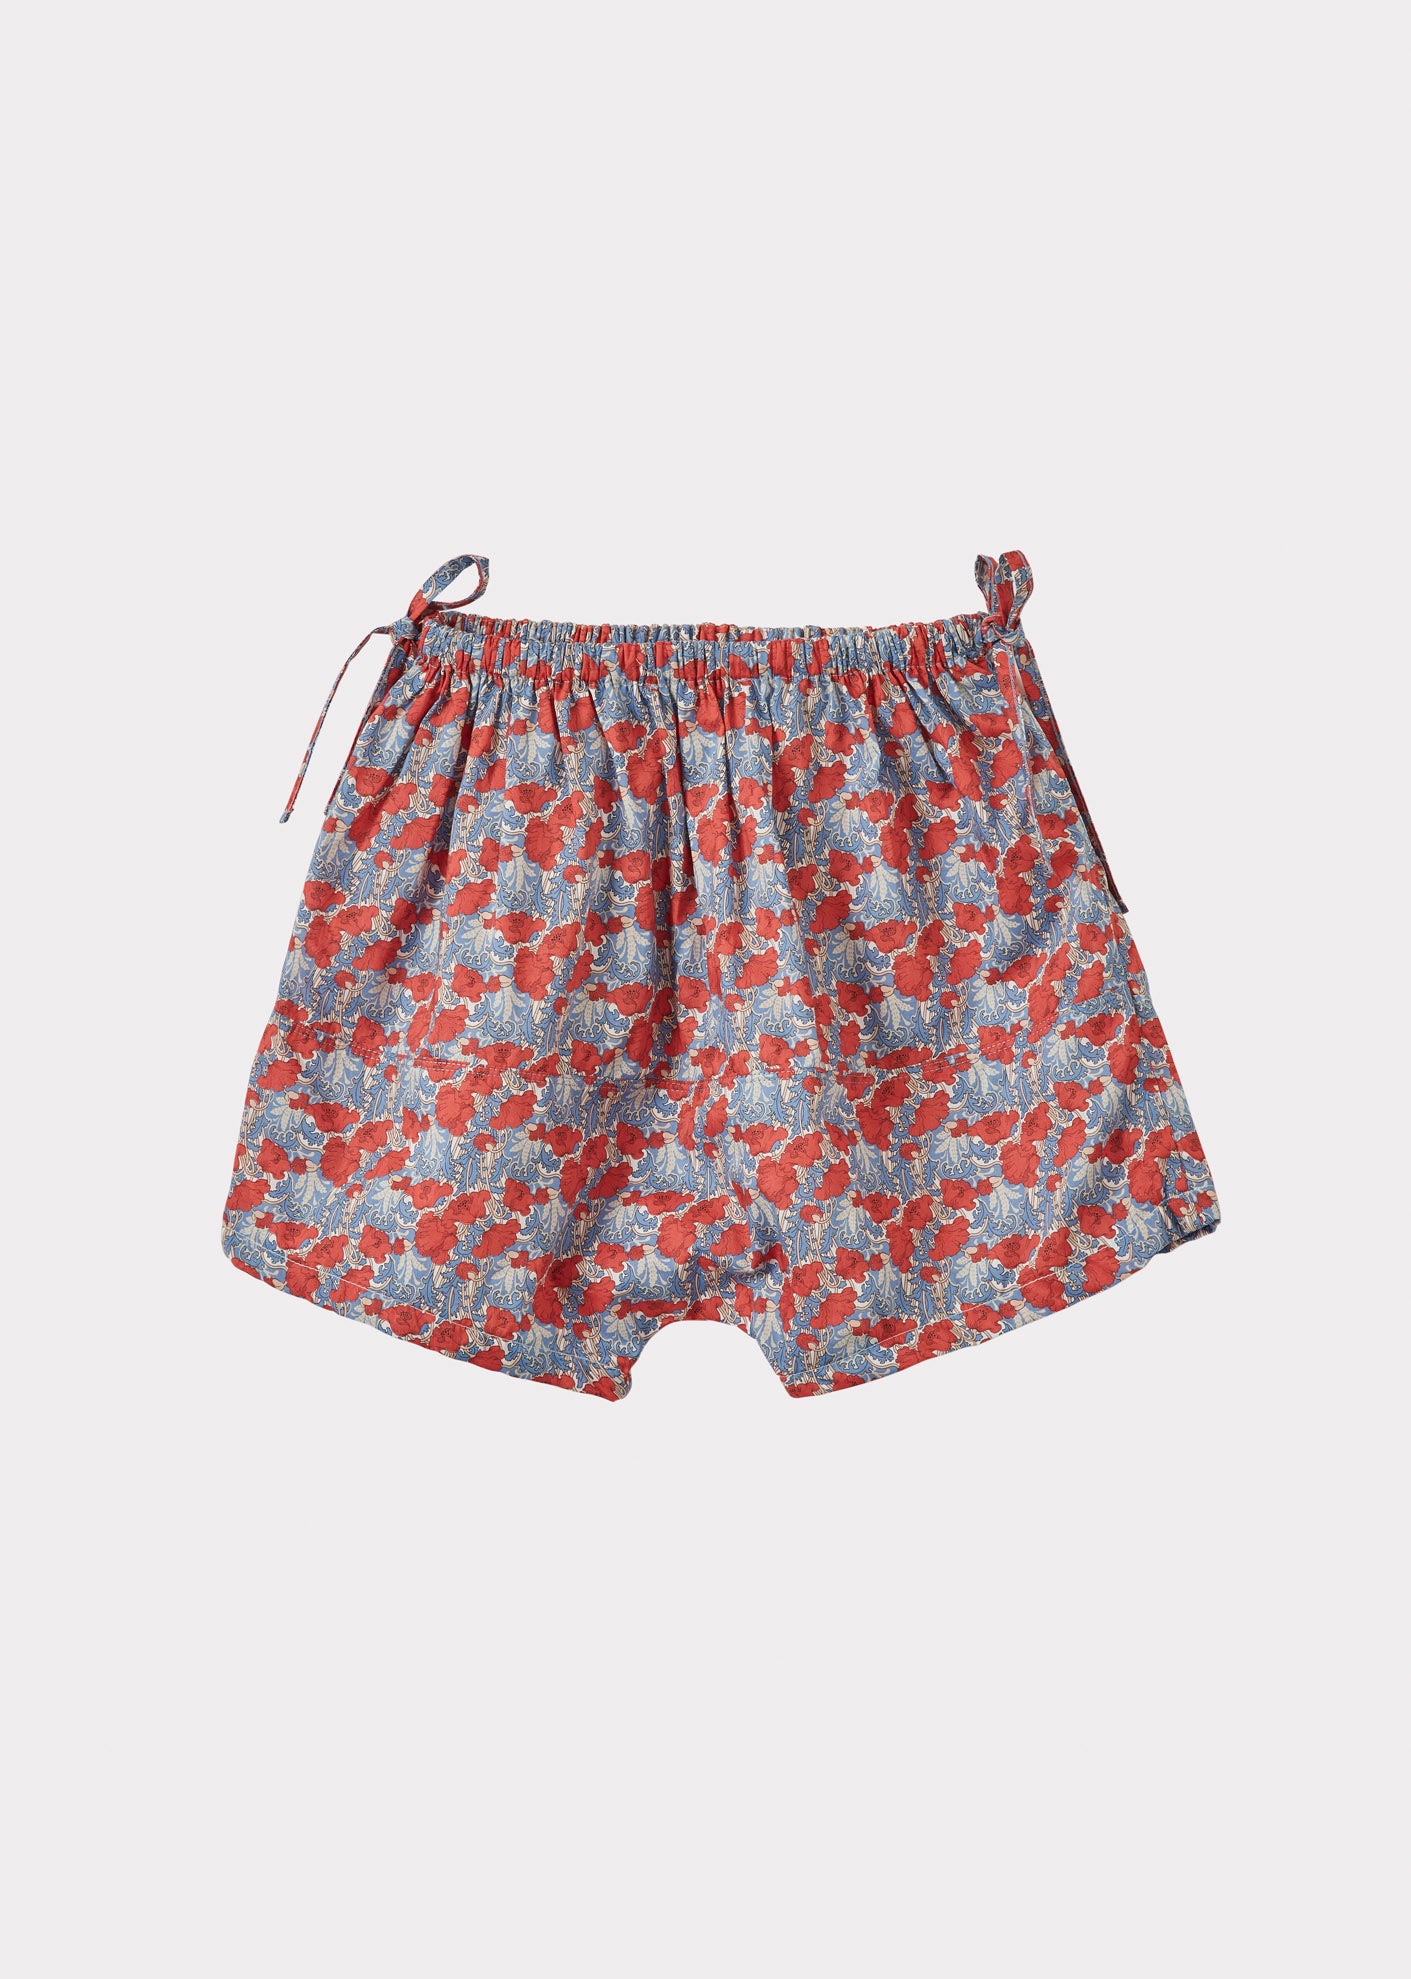 LOVAGE SHORTS - BLUE/RED